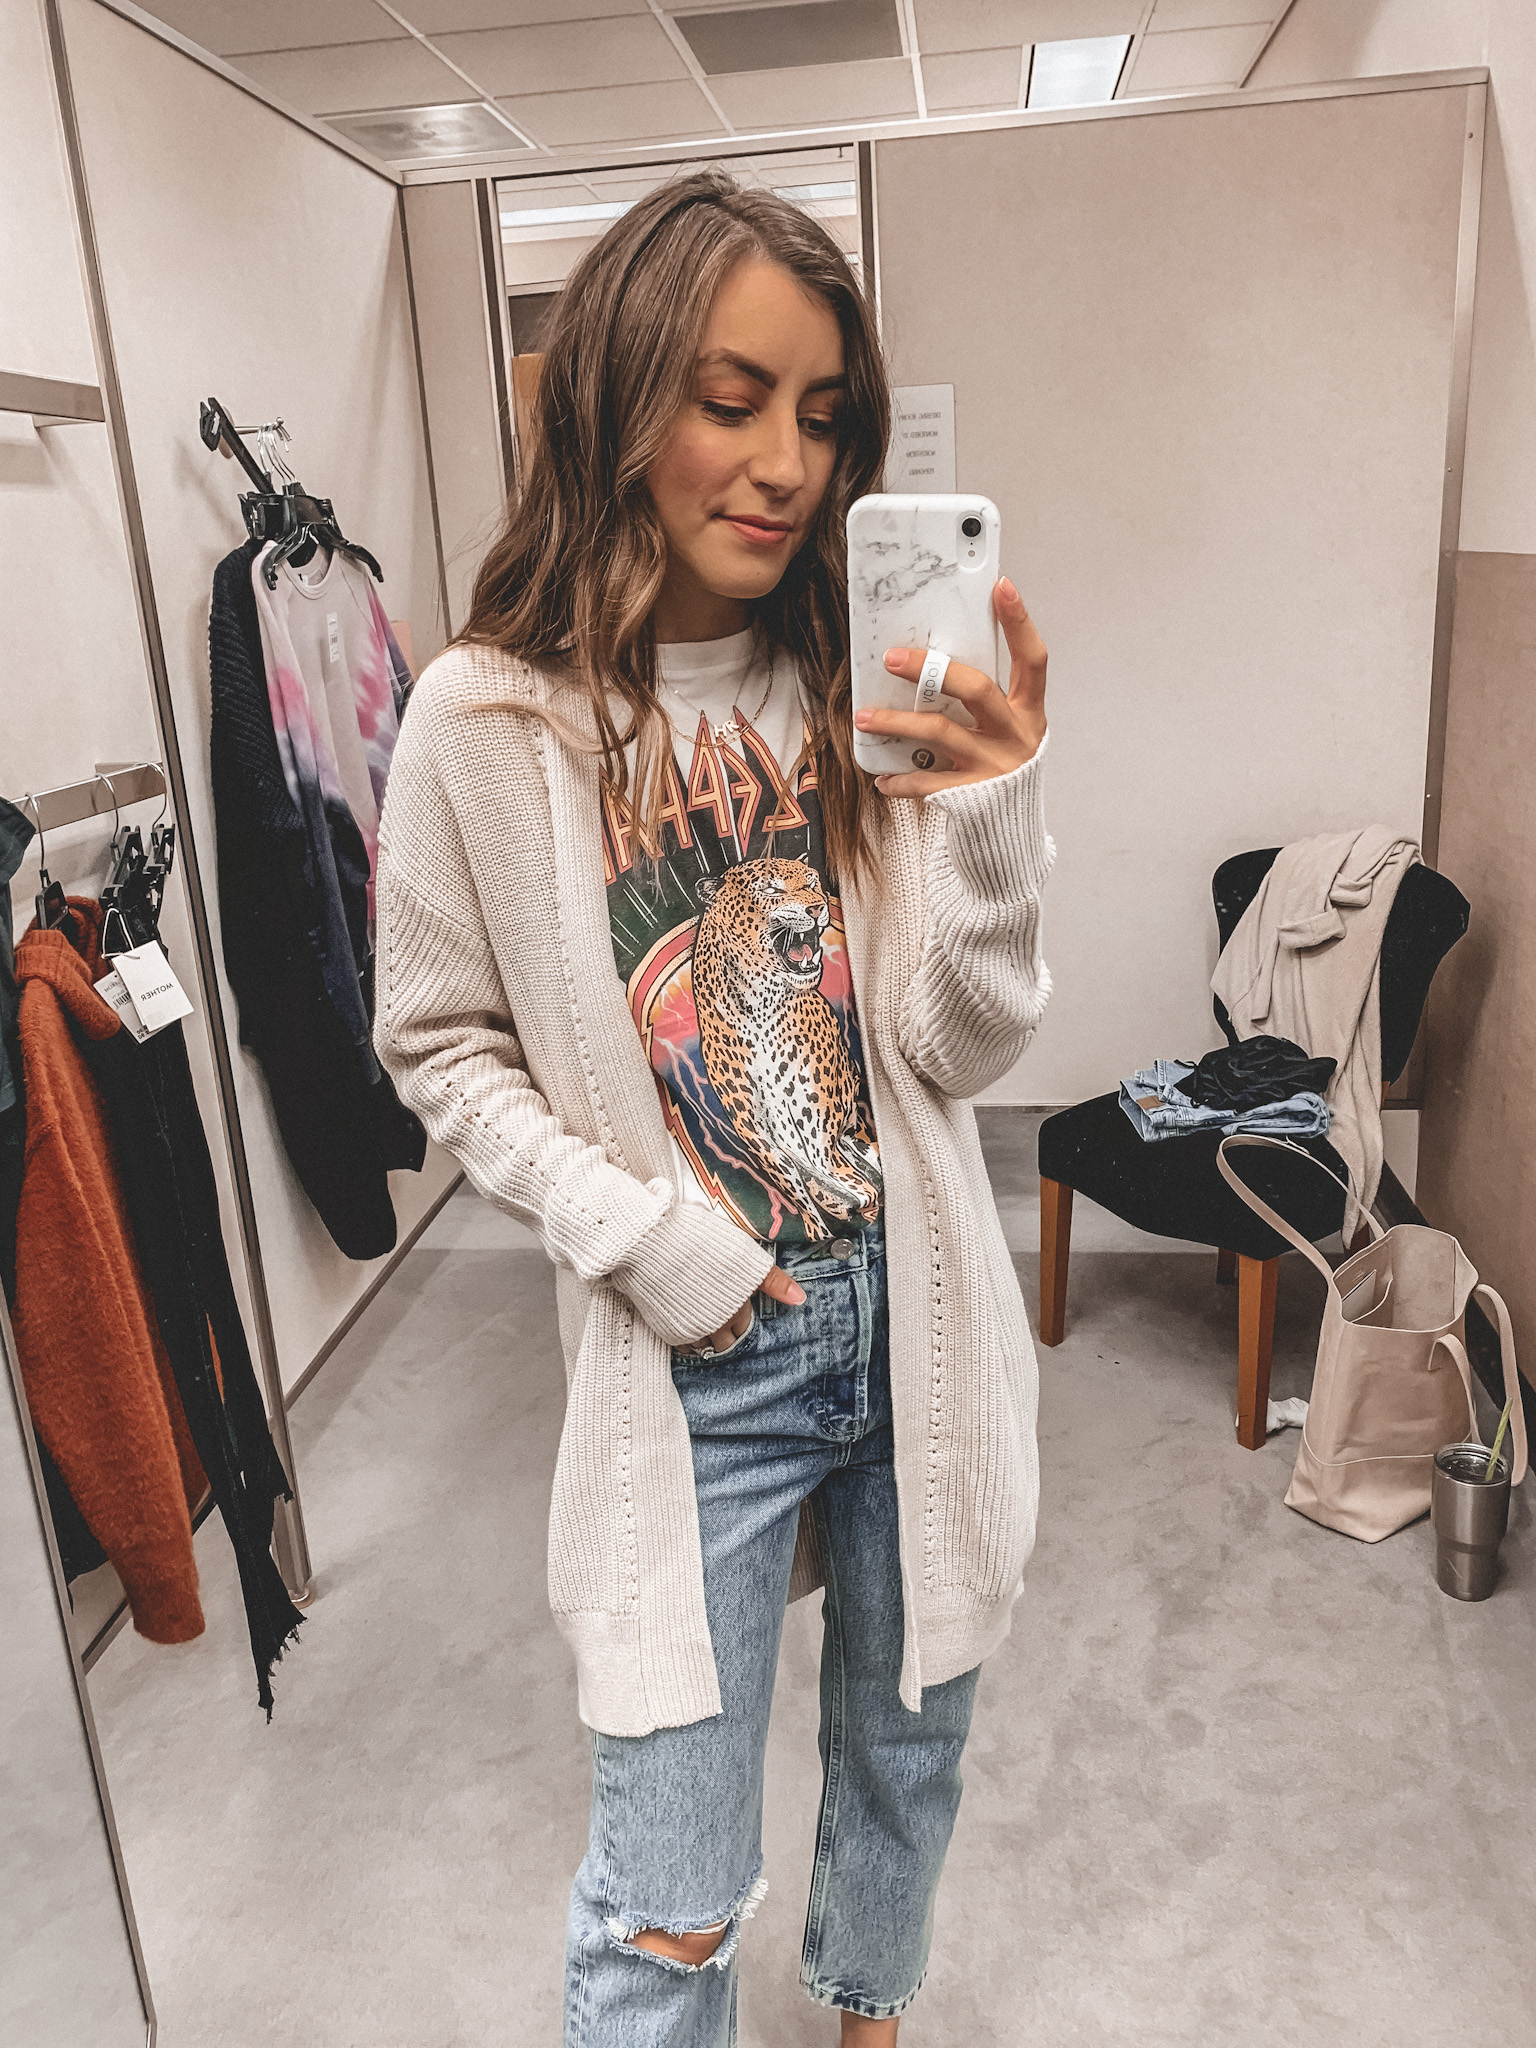 2023 Nordstrom Anniversary Sale: The Ins and Outs - The Everygirl